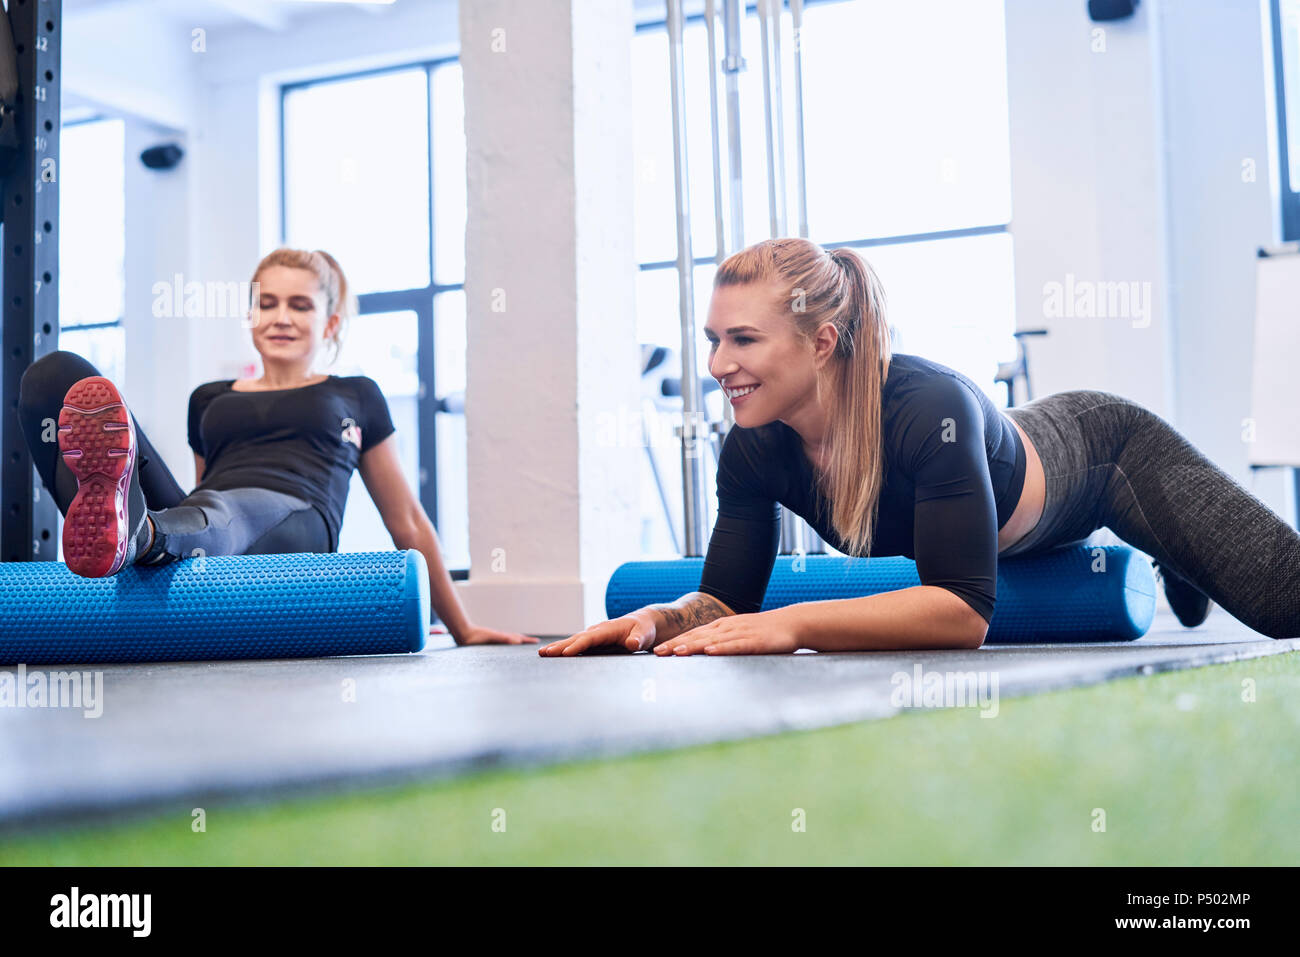 Two women massaging after gym workout Stock Photo